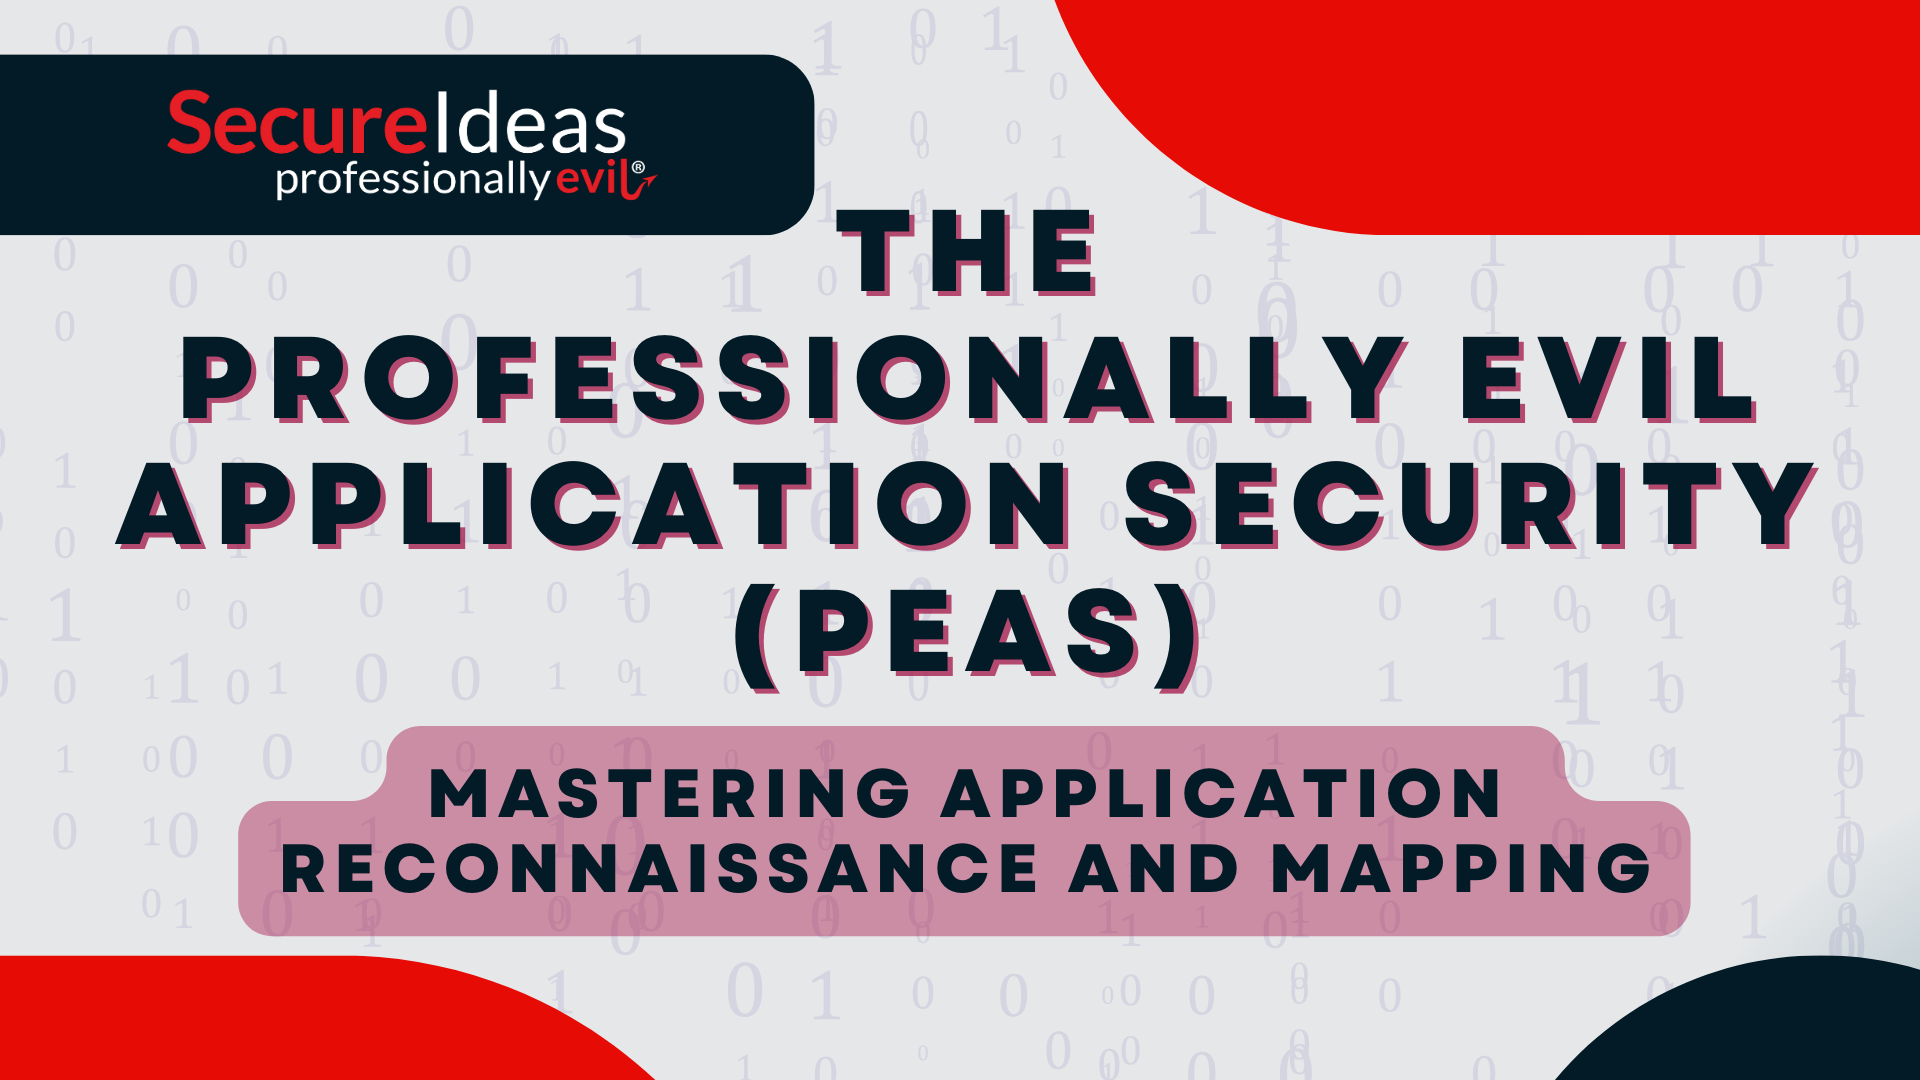 The Professionally Evil Application Security (PEAS) Mastering Application Reconnaissance and Mapping